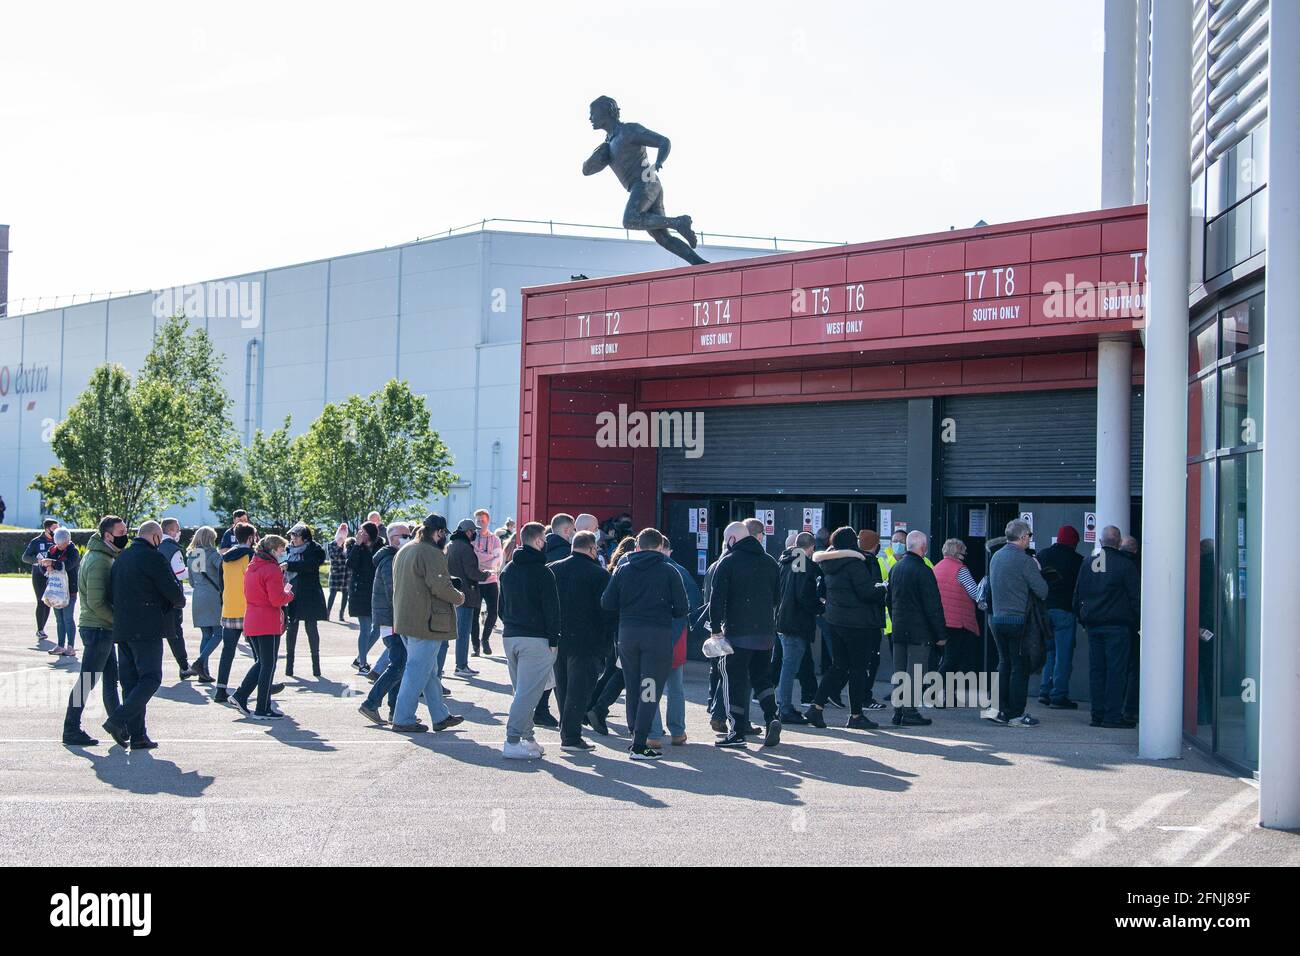 St. Helens fans make there way into the Totally Wicked Stadium, home of St. Helens ahead of tonights game Stock Photo